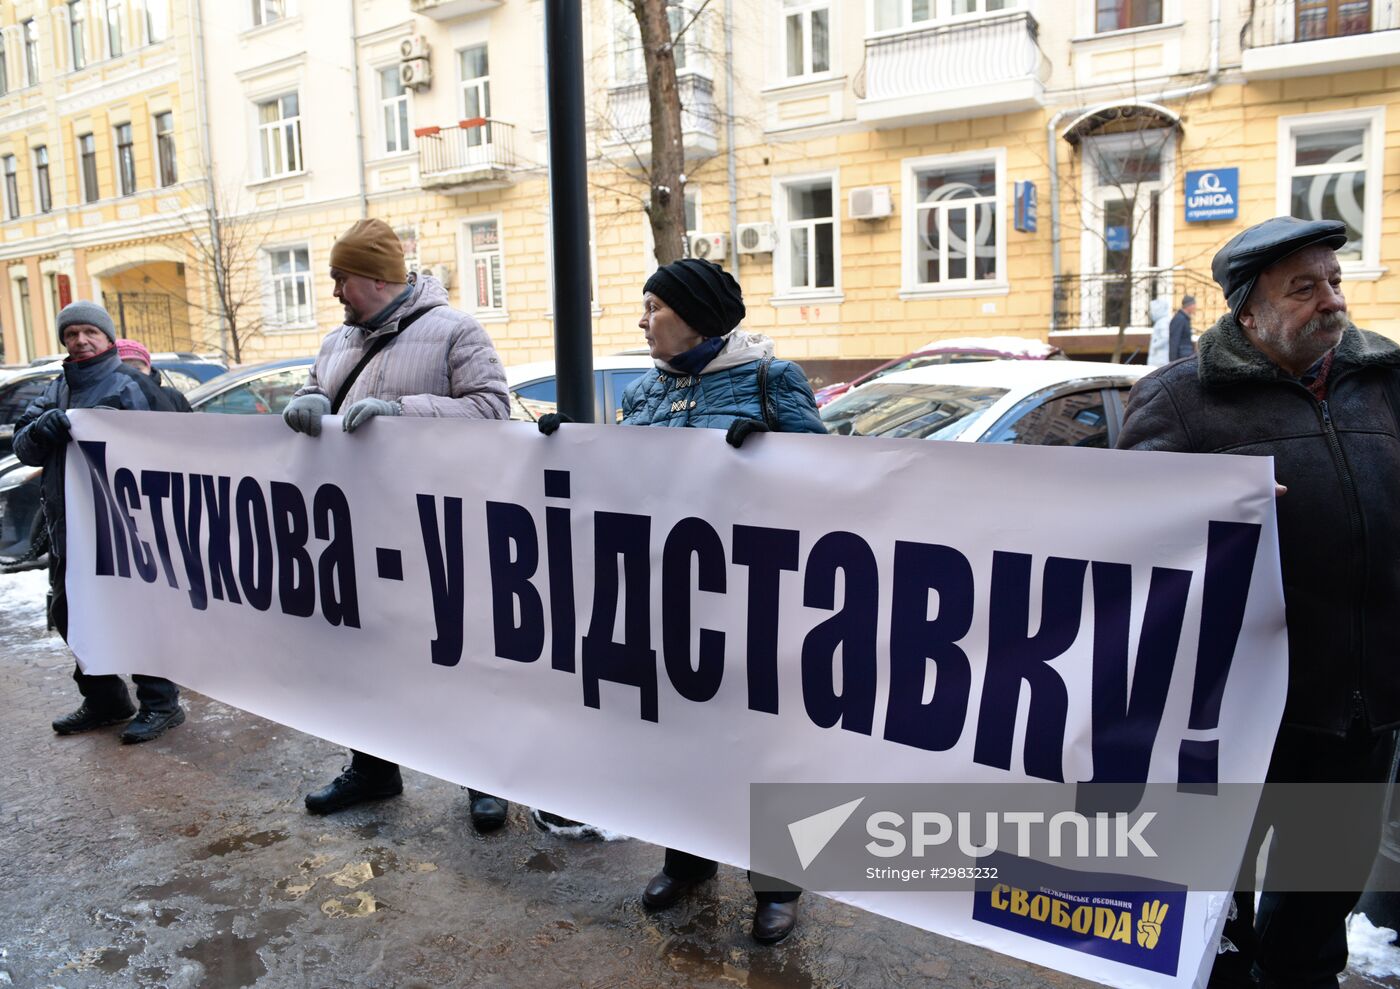 Rally to protest adoption of quota on settlement of immigrants in Ukraine